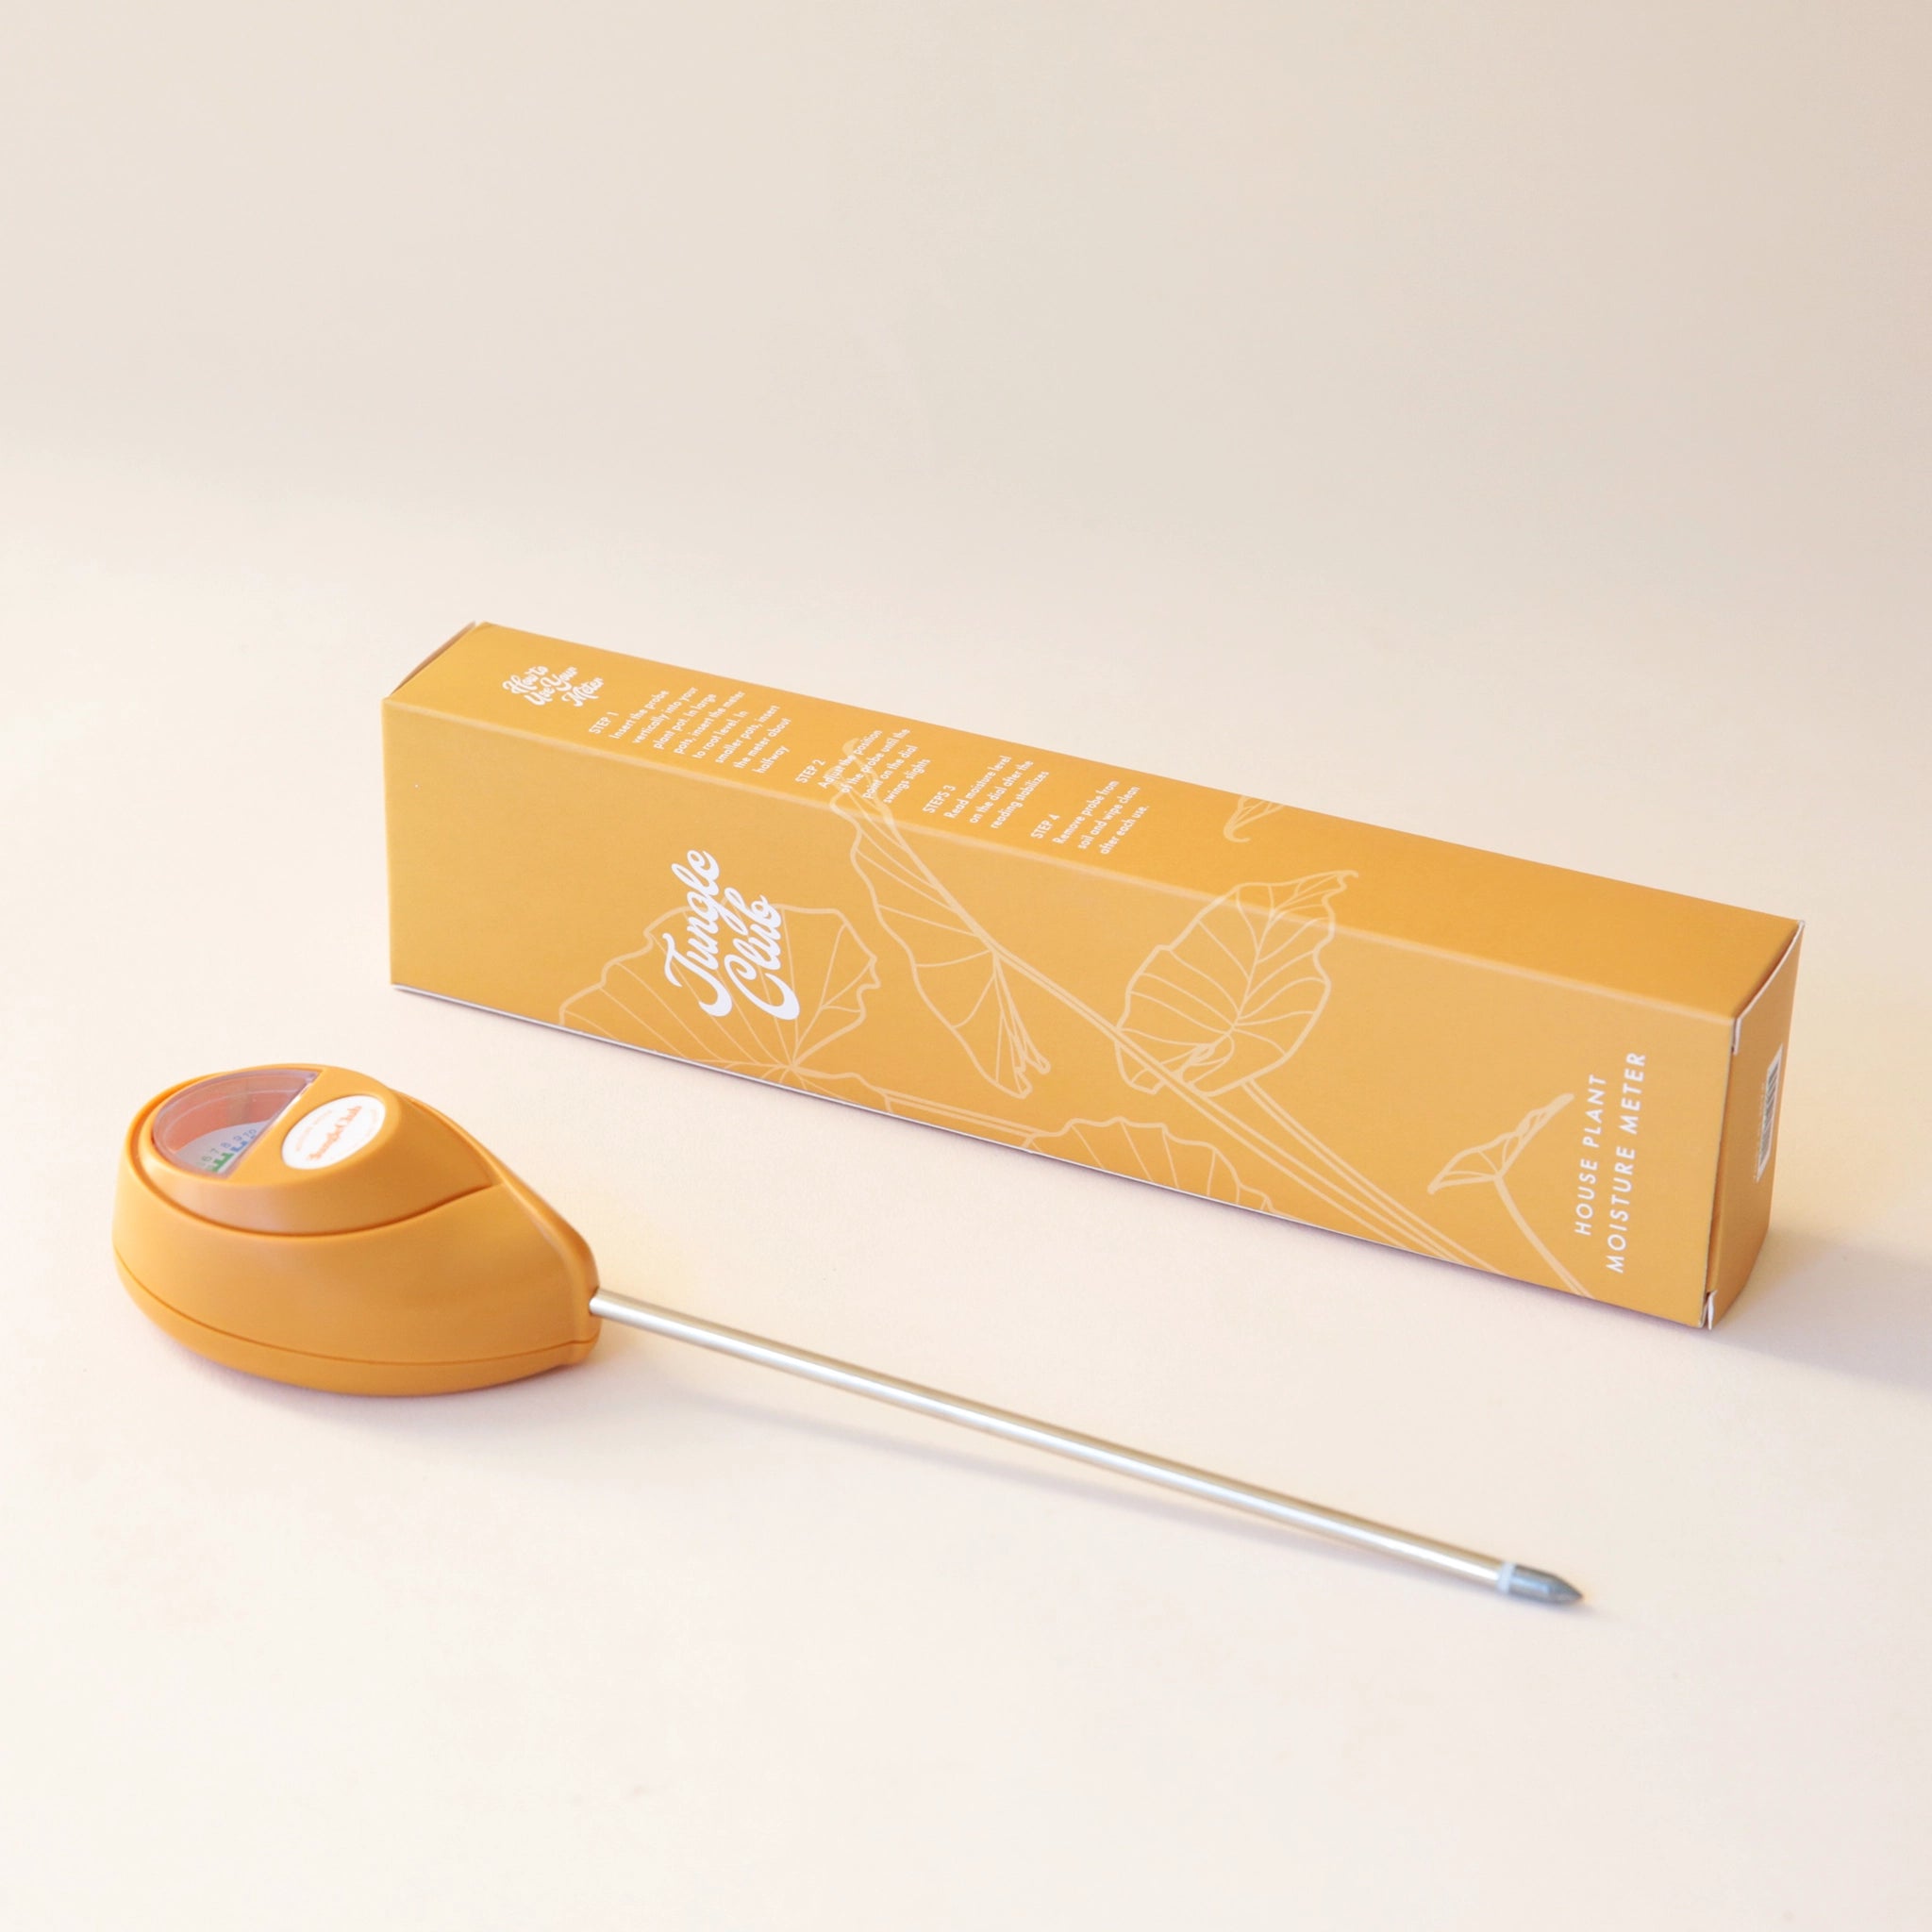 An orange moisture meter with a rounded head and a white meter that ranges from dry, moist, or wet along with a small oval label in the front that reads, &quot;Jungle Club&quot;.